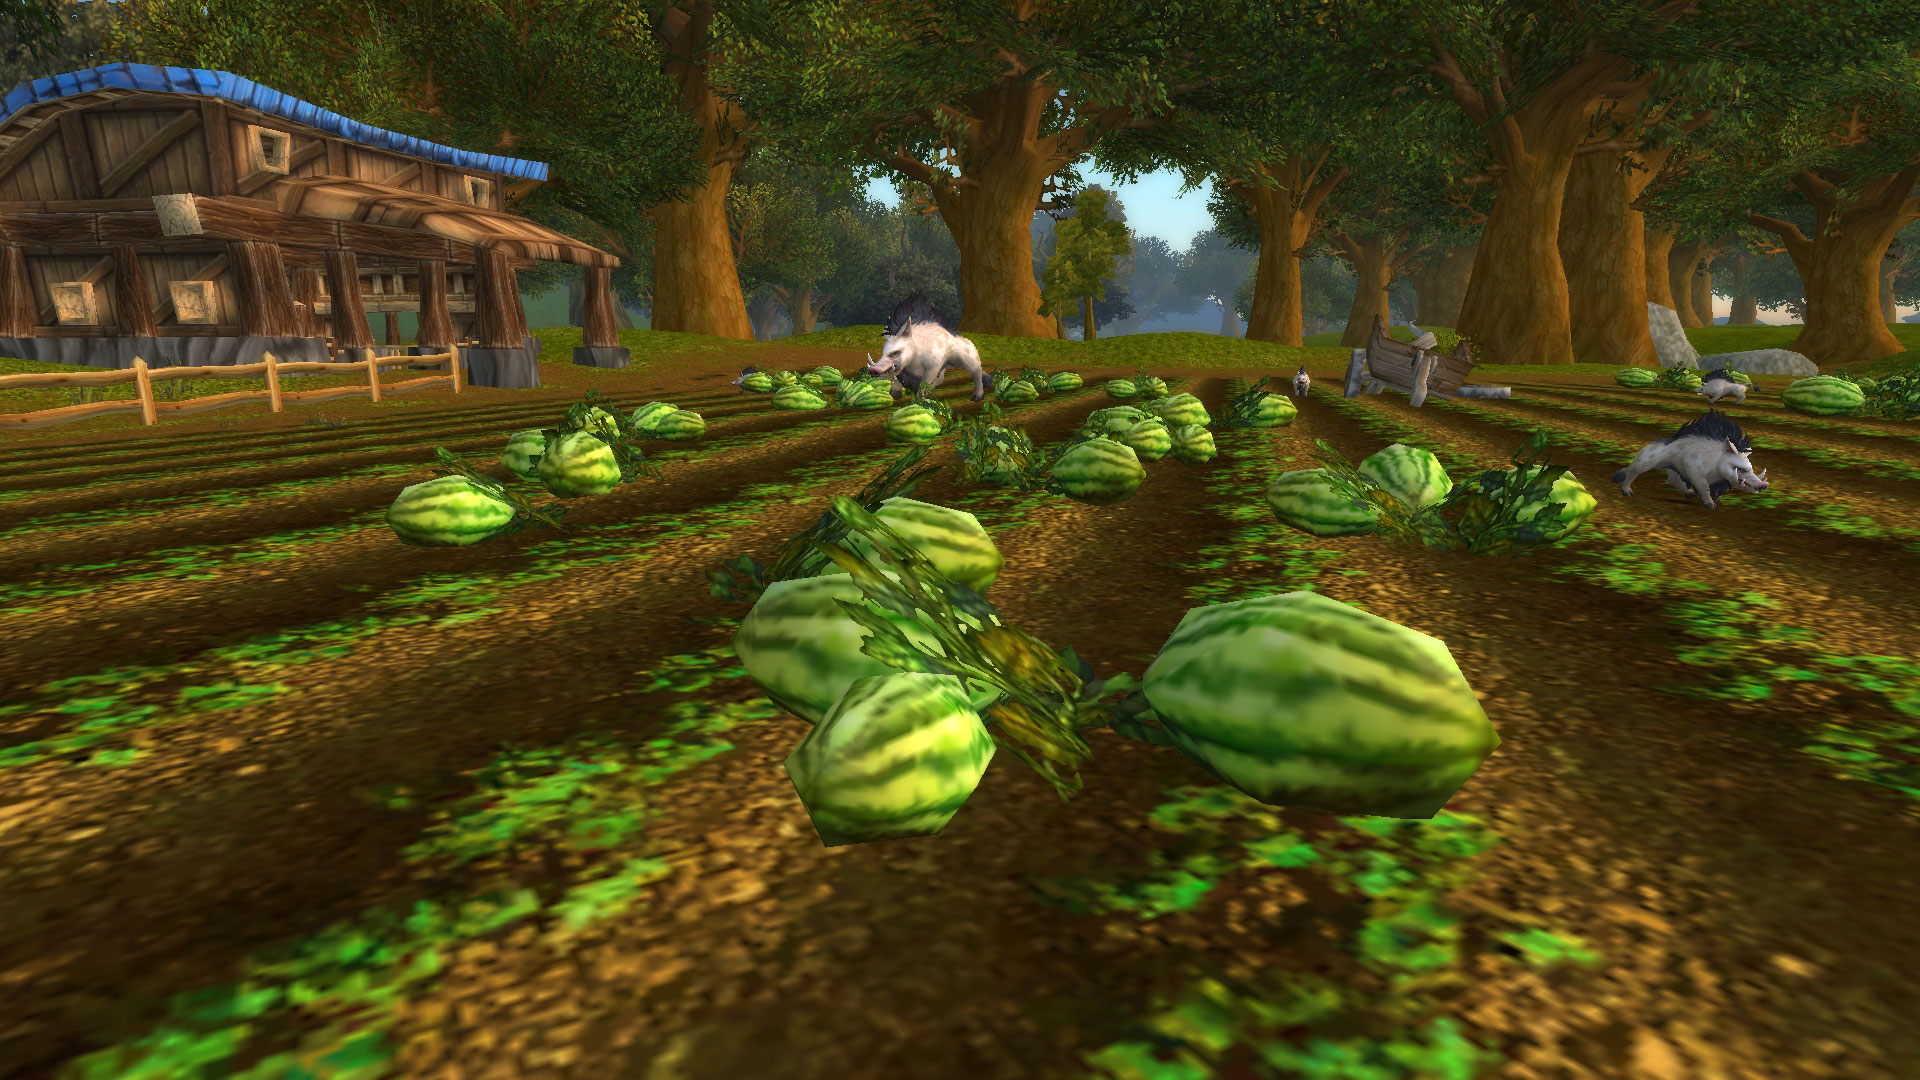 The Most Underrated World Of Warcraft Zones: An Overview